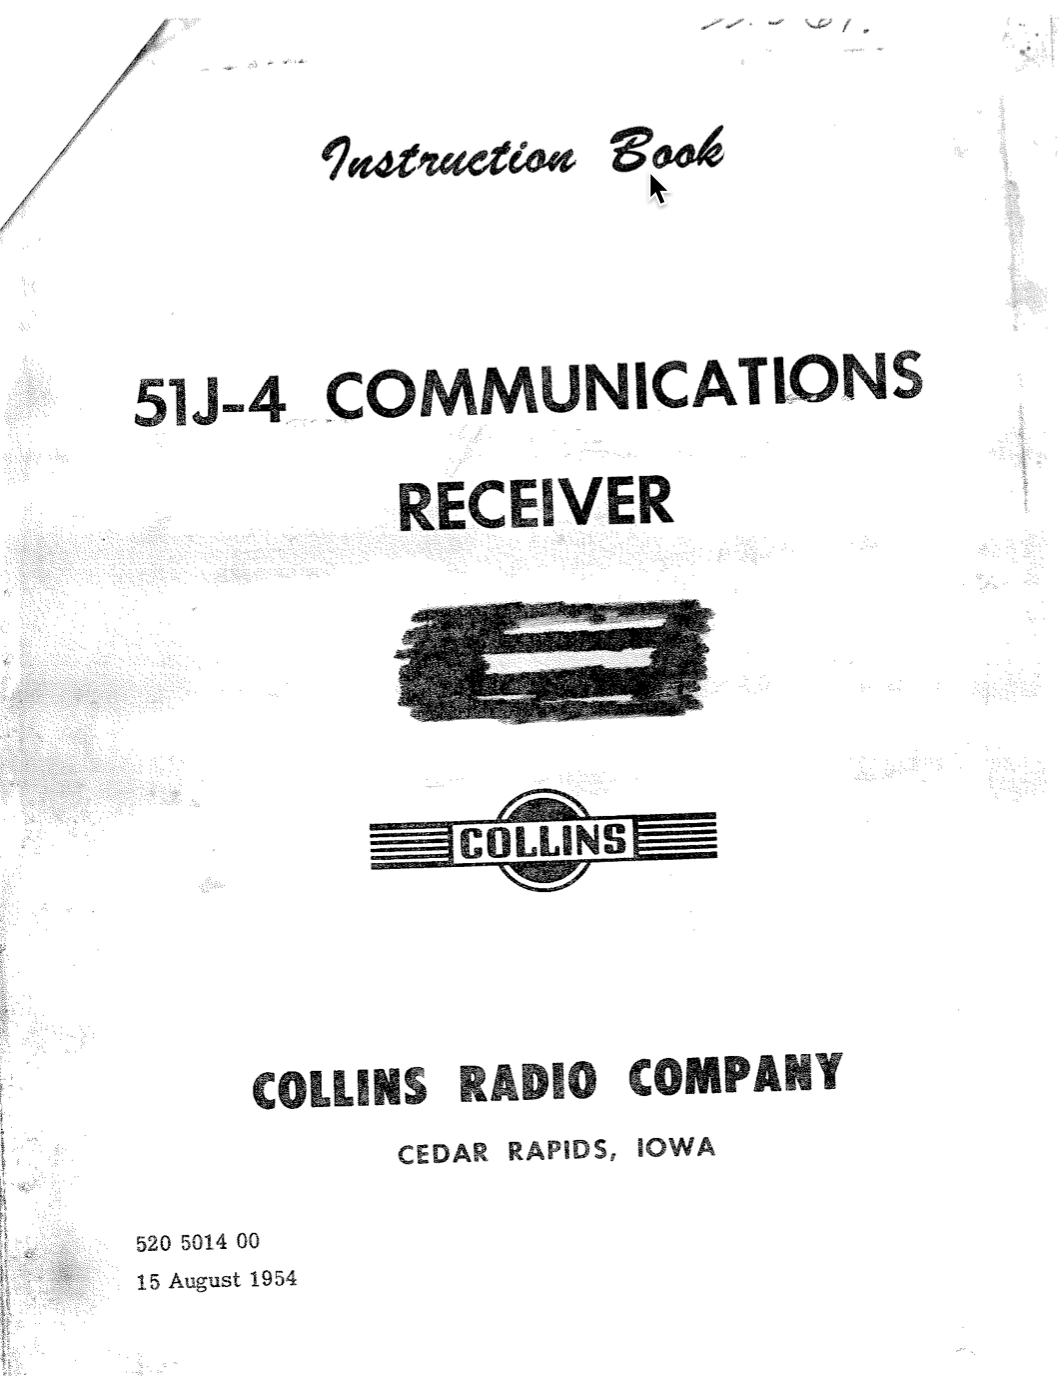 Collins 51J-4 Communications Receiver - Instruction Manual (1st Edition 1954)